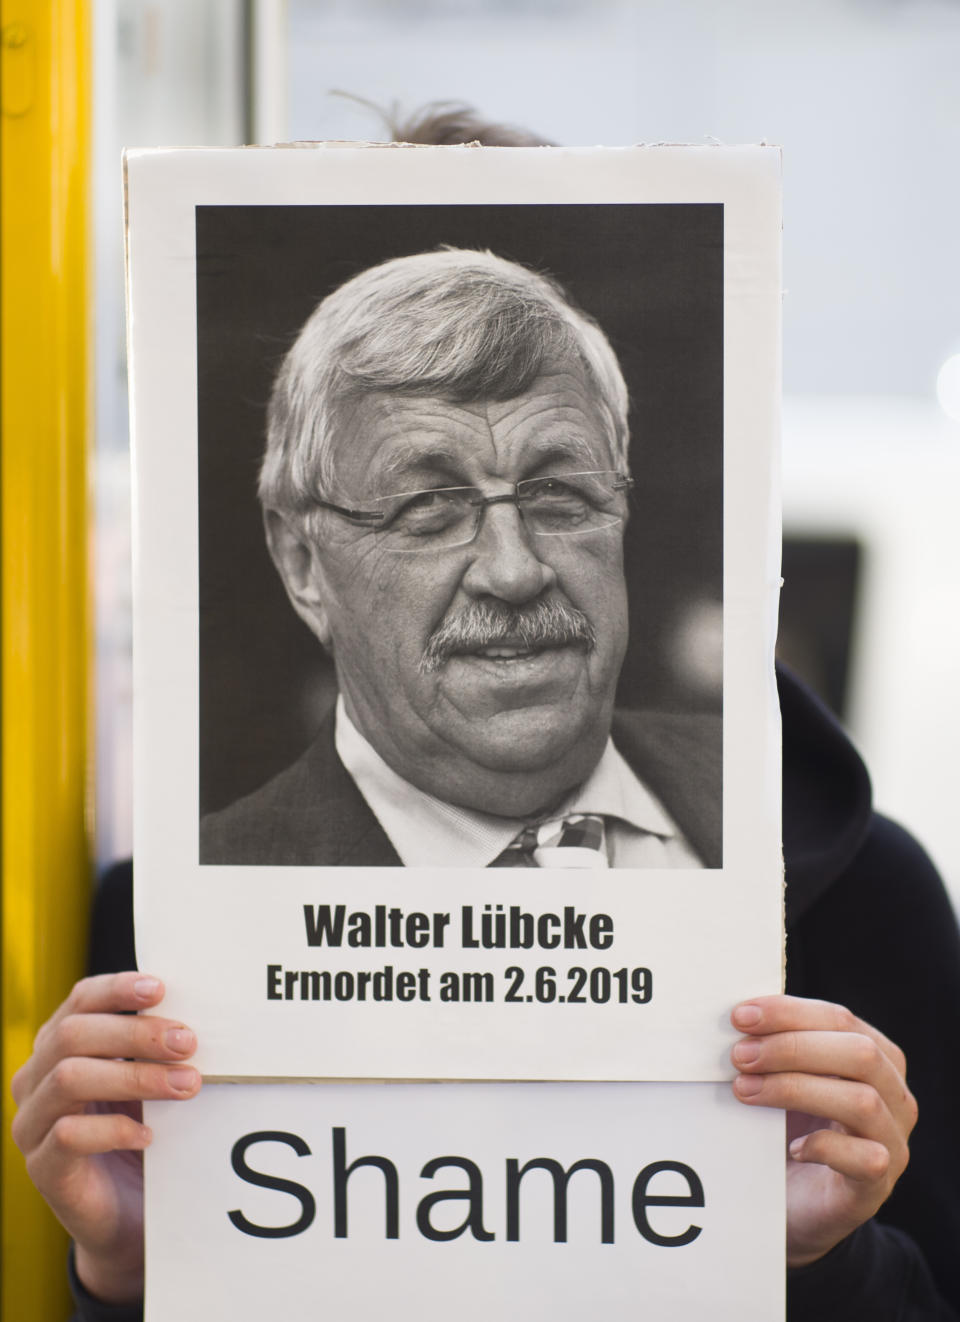 FILE - In this June 18, 2019 file photo, an activists of the Antifa, anti-fascism action, shows a poster of Walter Luebcke during a protest against right-wing violence in Berlin, Germany, Tuesday, June 18, 2019. Germany's top security official says the far-right extremist suspected in the killing of a politician from Chancellor Angela Merkel's party has told authorities that he acted alone. Walter Luebcke, who led the Kassel regional administration in central Germany, was fatally shot in the head at his home on June 2. (AP Photo/Markus Schreiber)